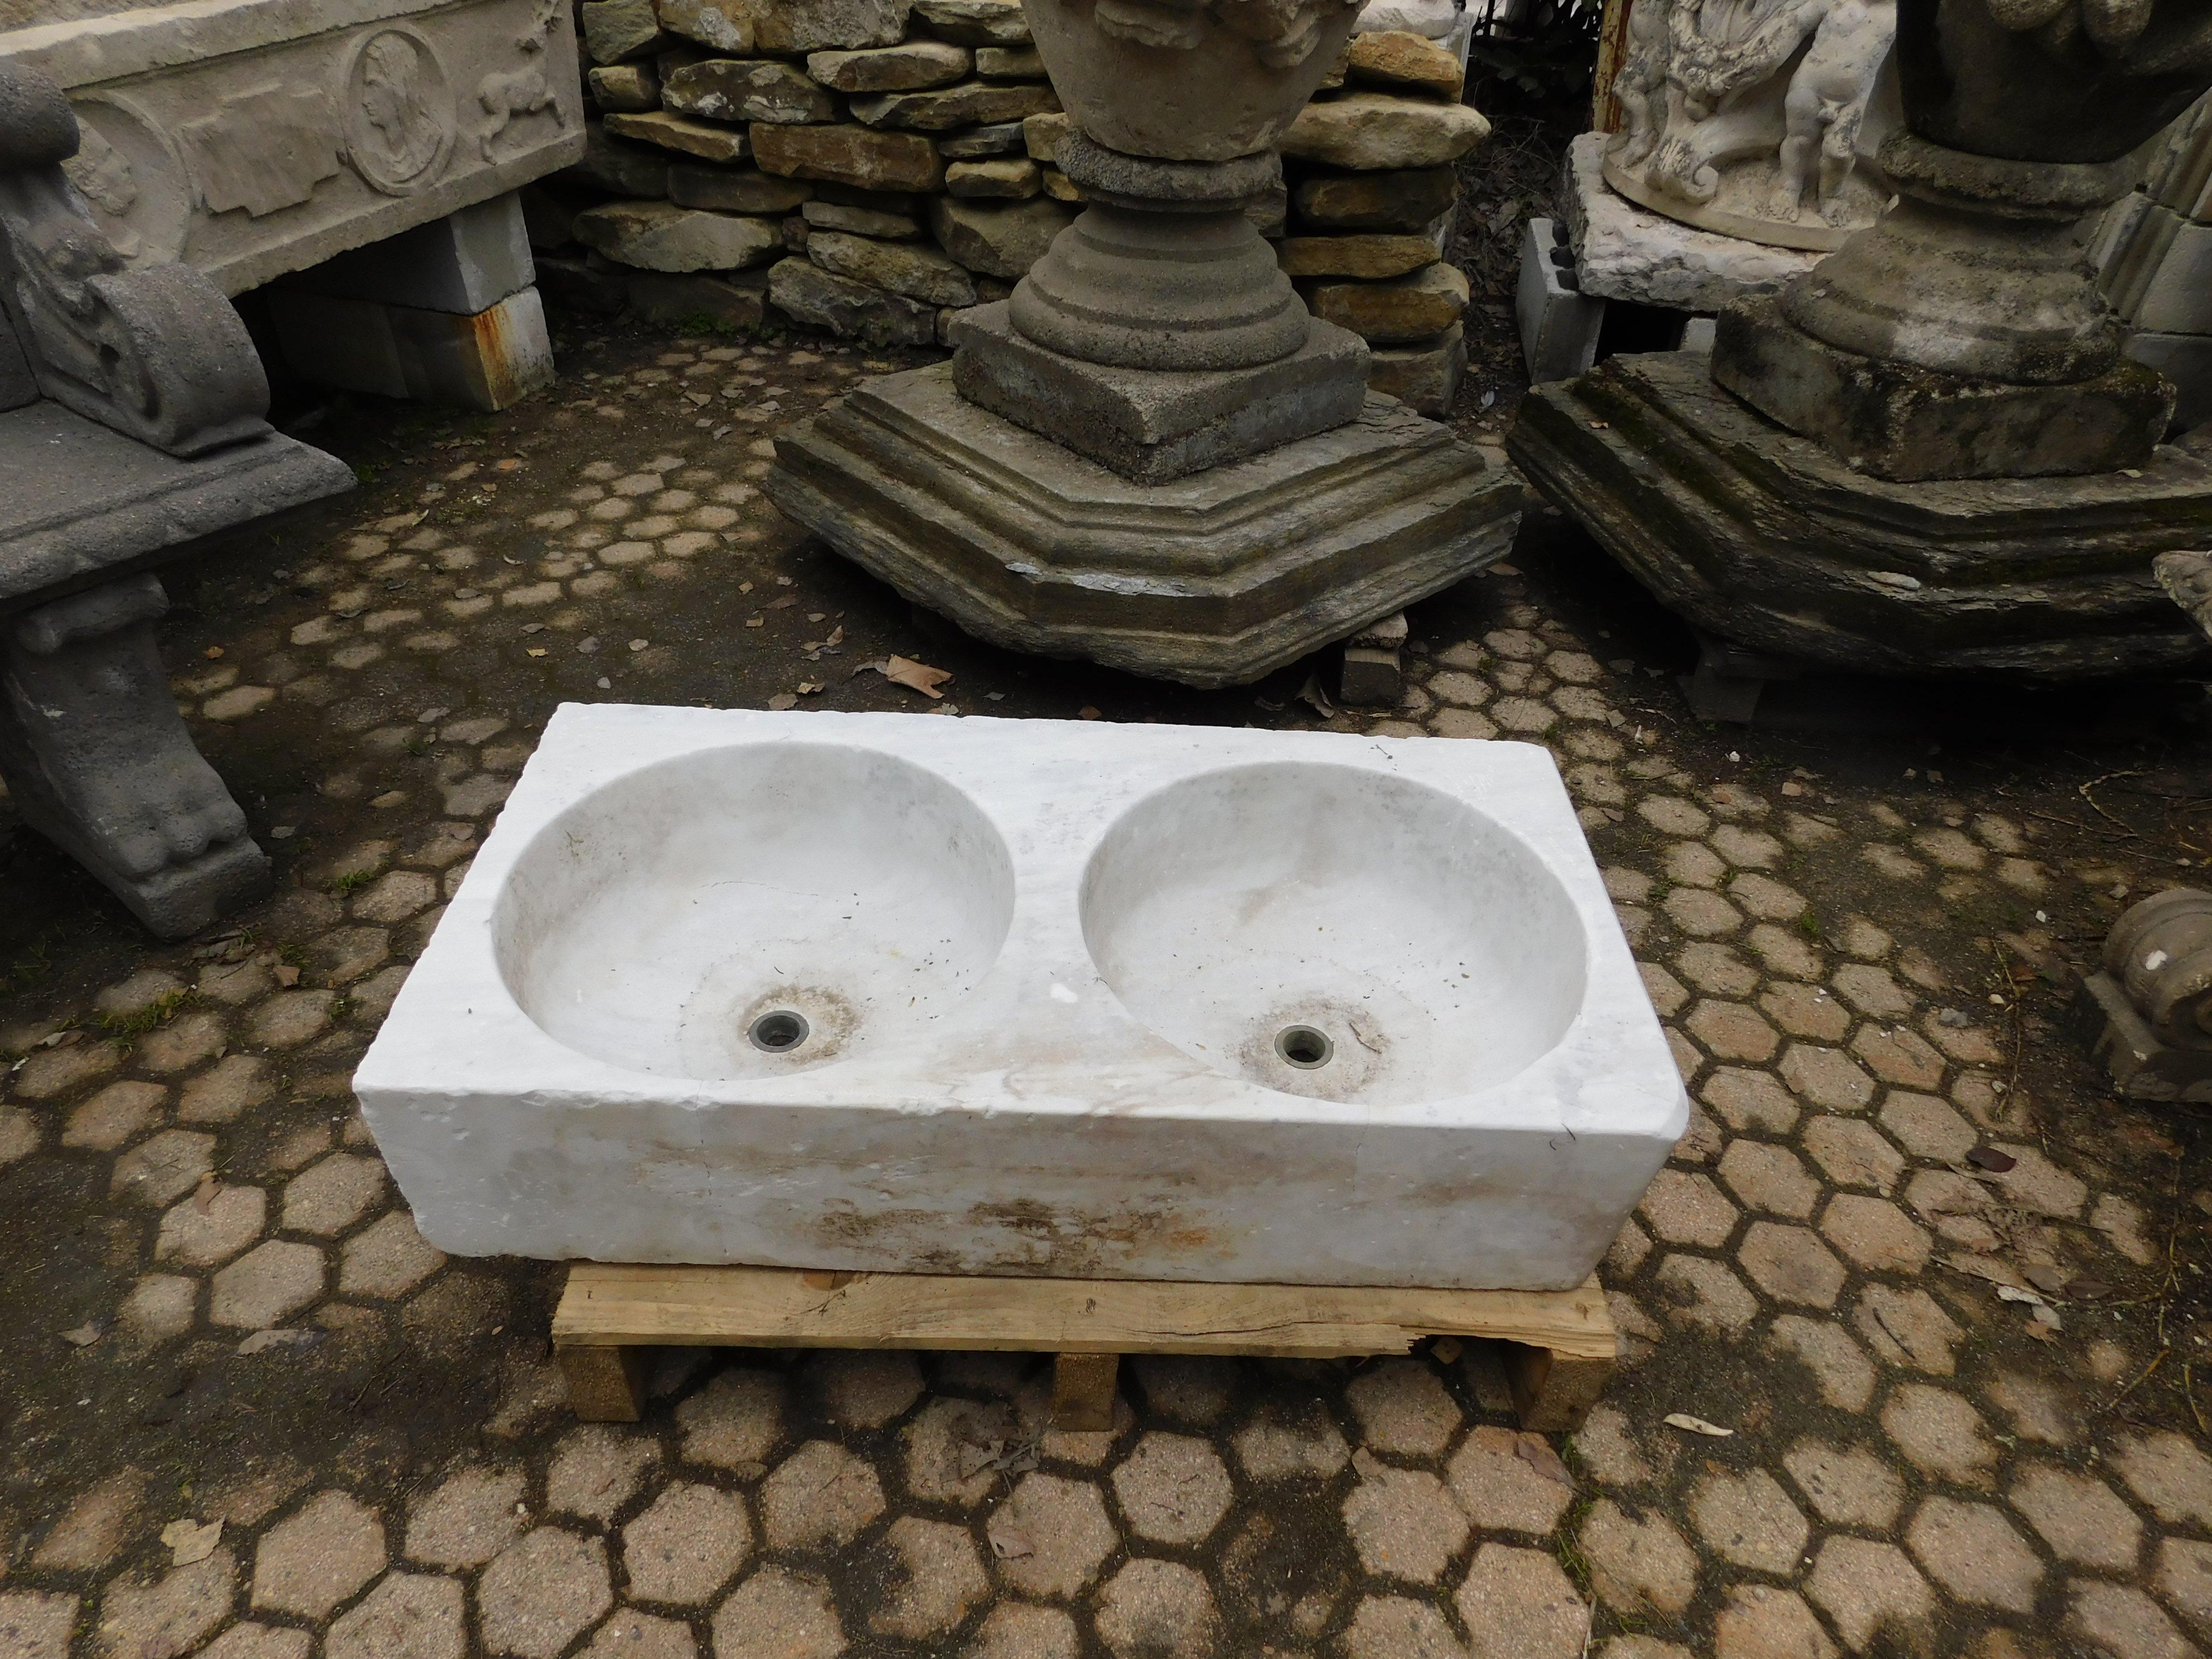 Antique old vintage Double washbasin, Carrara white marble sink for indoor or outdoor use, built in the second half of the 1900s in Italy, with precious white marble, it has two round basins measuring 40 cm in circumference and 16 cm in height,